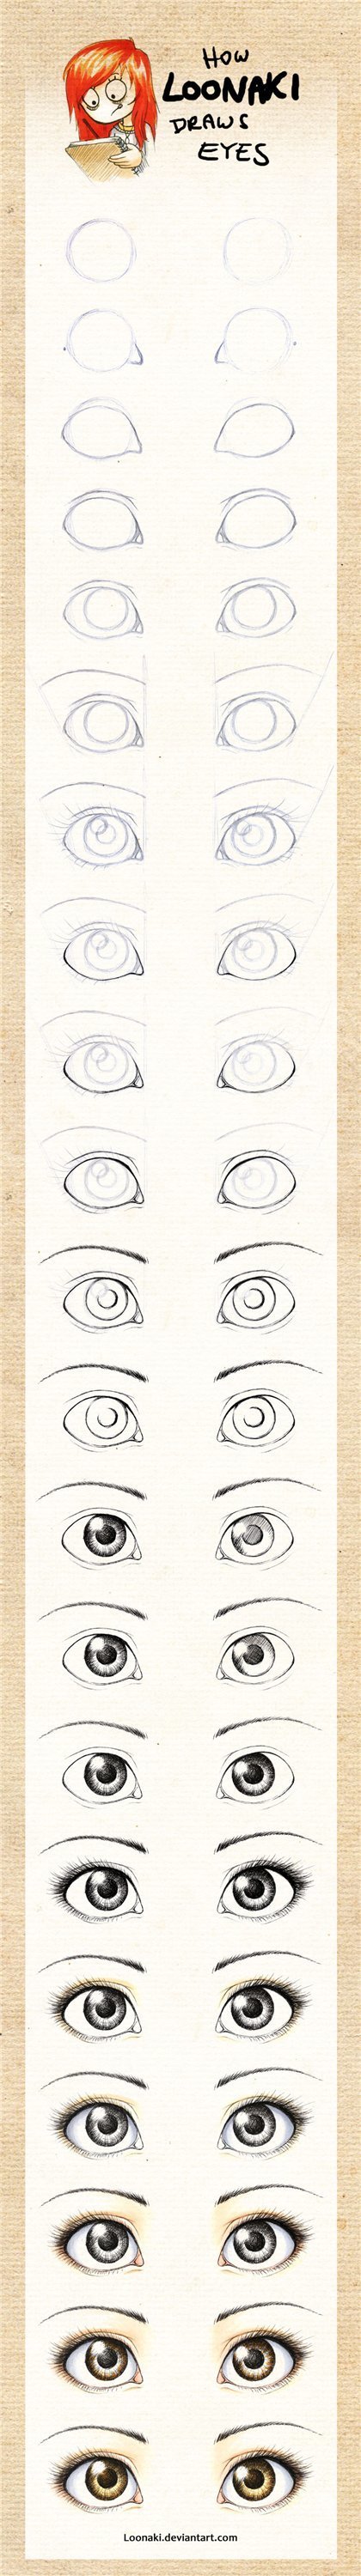 How To Draw Eyes | Drawing References and Resources | Scoop.it